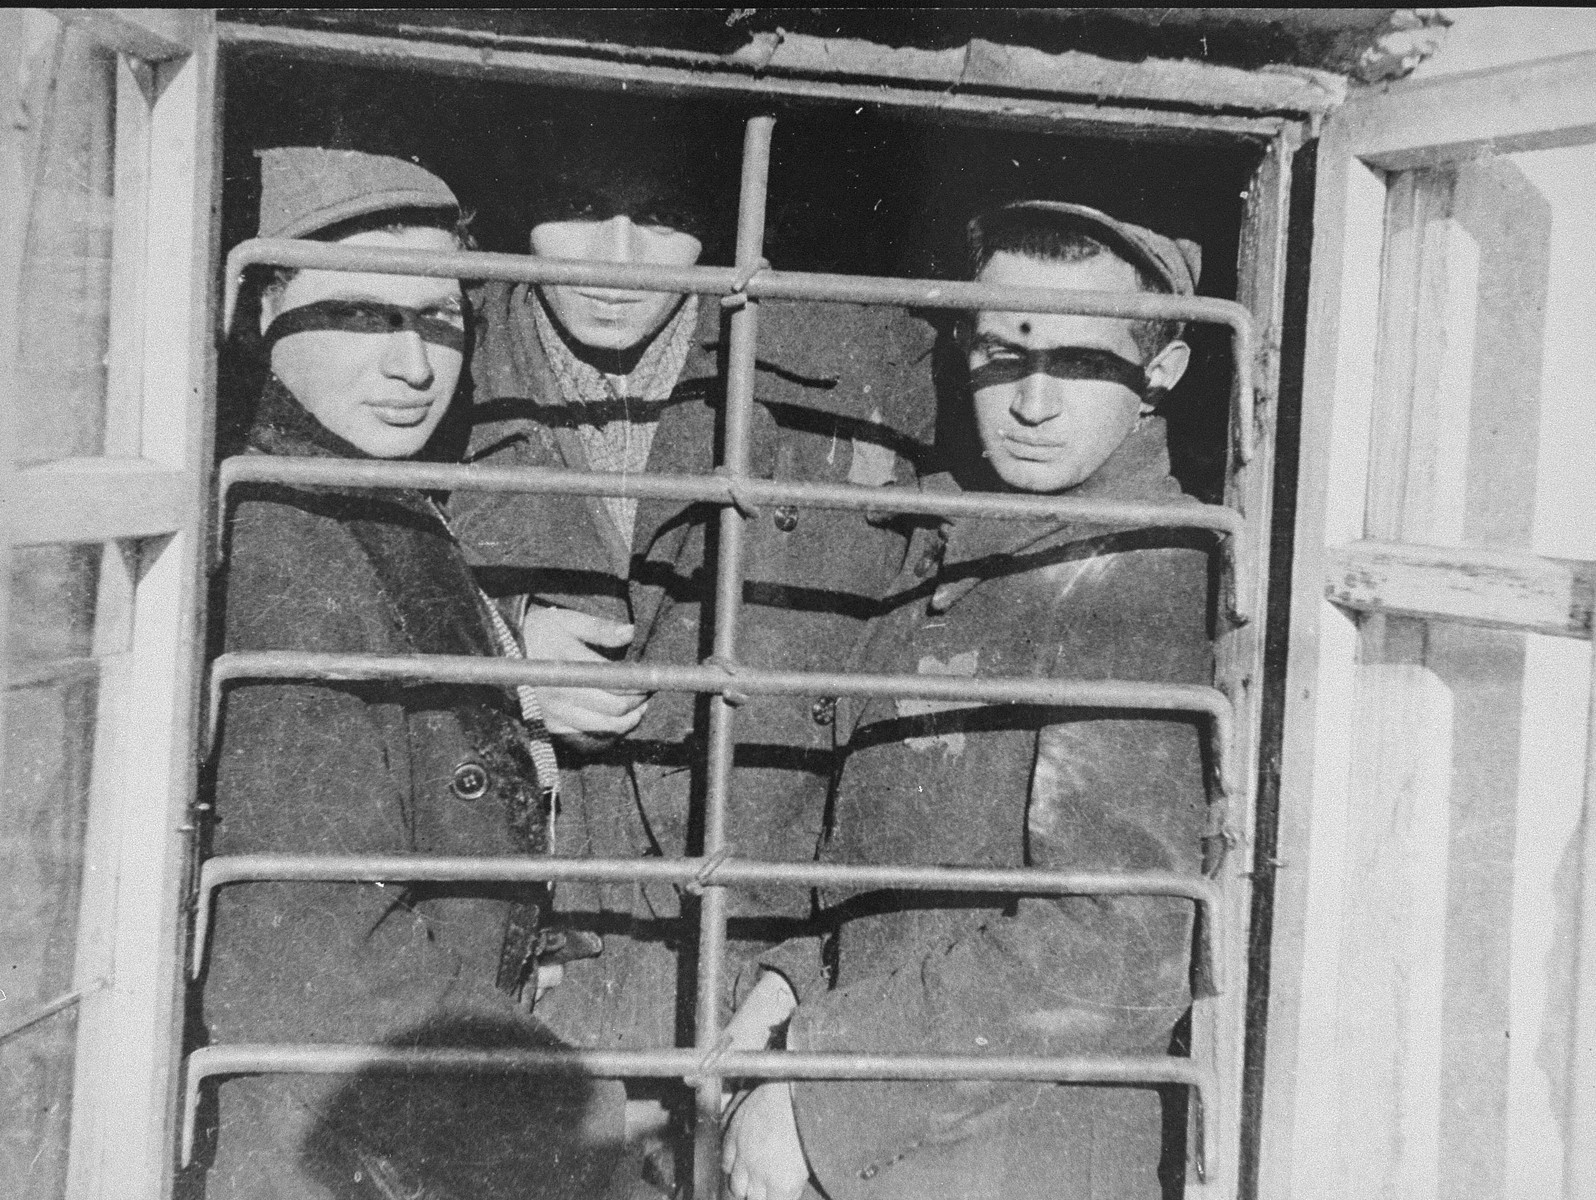 Three men behind a barred window in the ghetto jail.